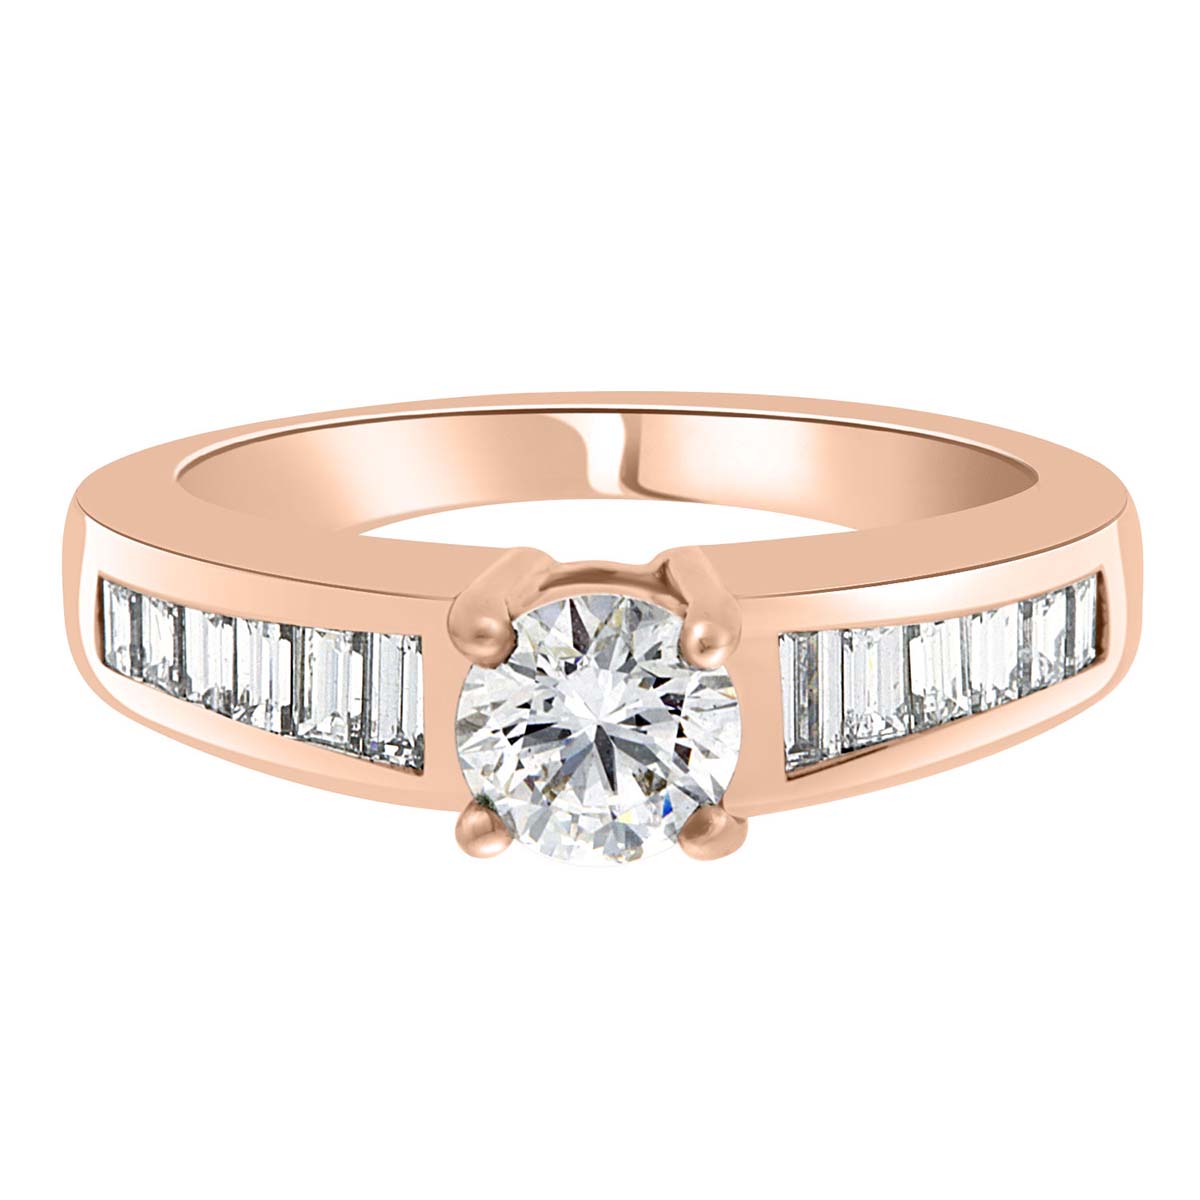 Baguette Diamond Ring made from rose gold